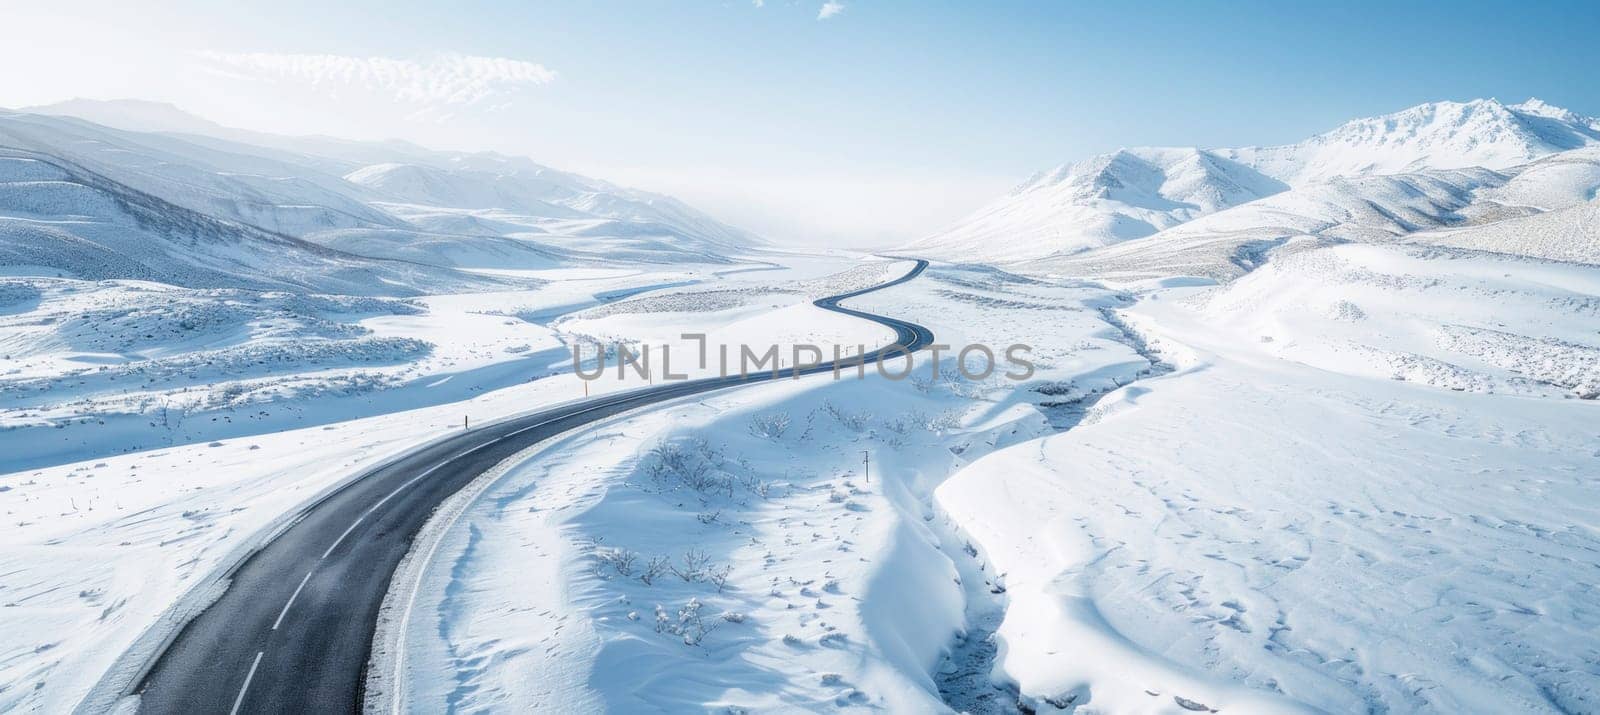 This is an aerial view of a snowcovered road meandering through hills, capturing the winter charm of nature